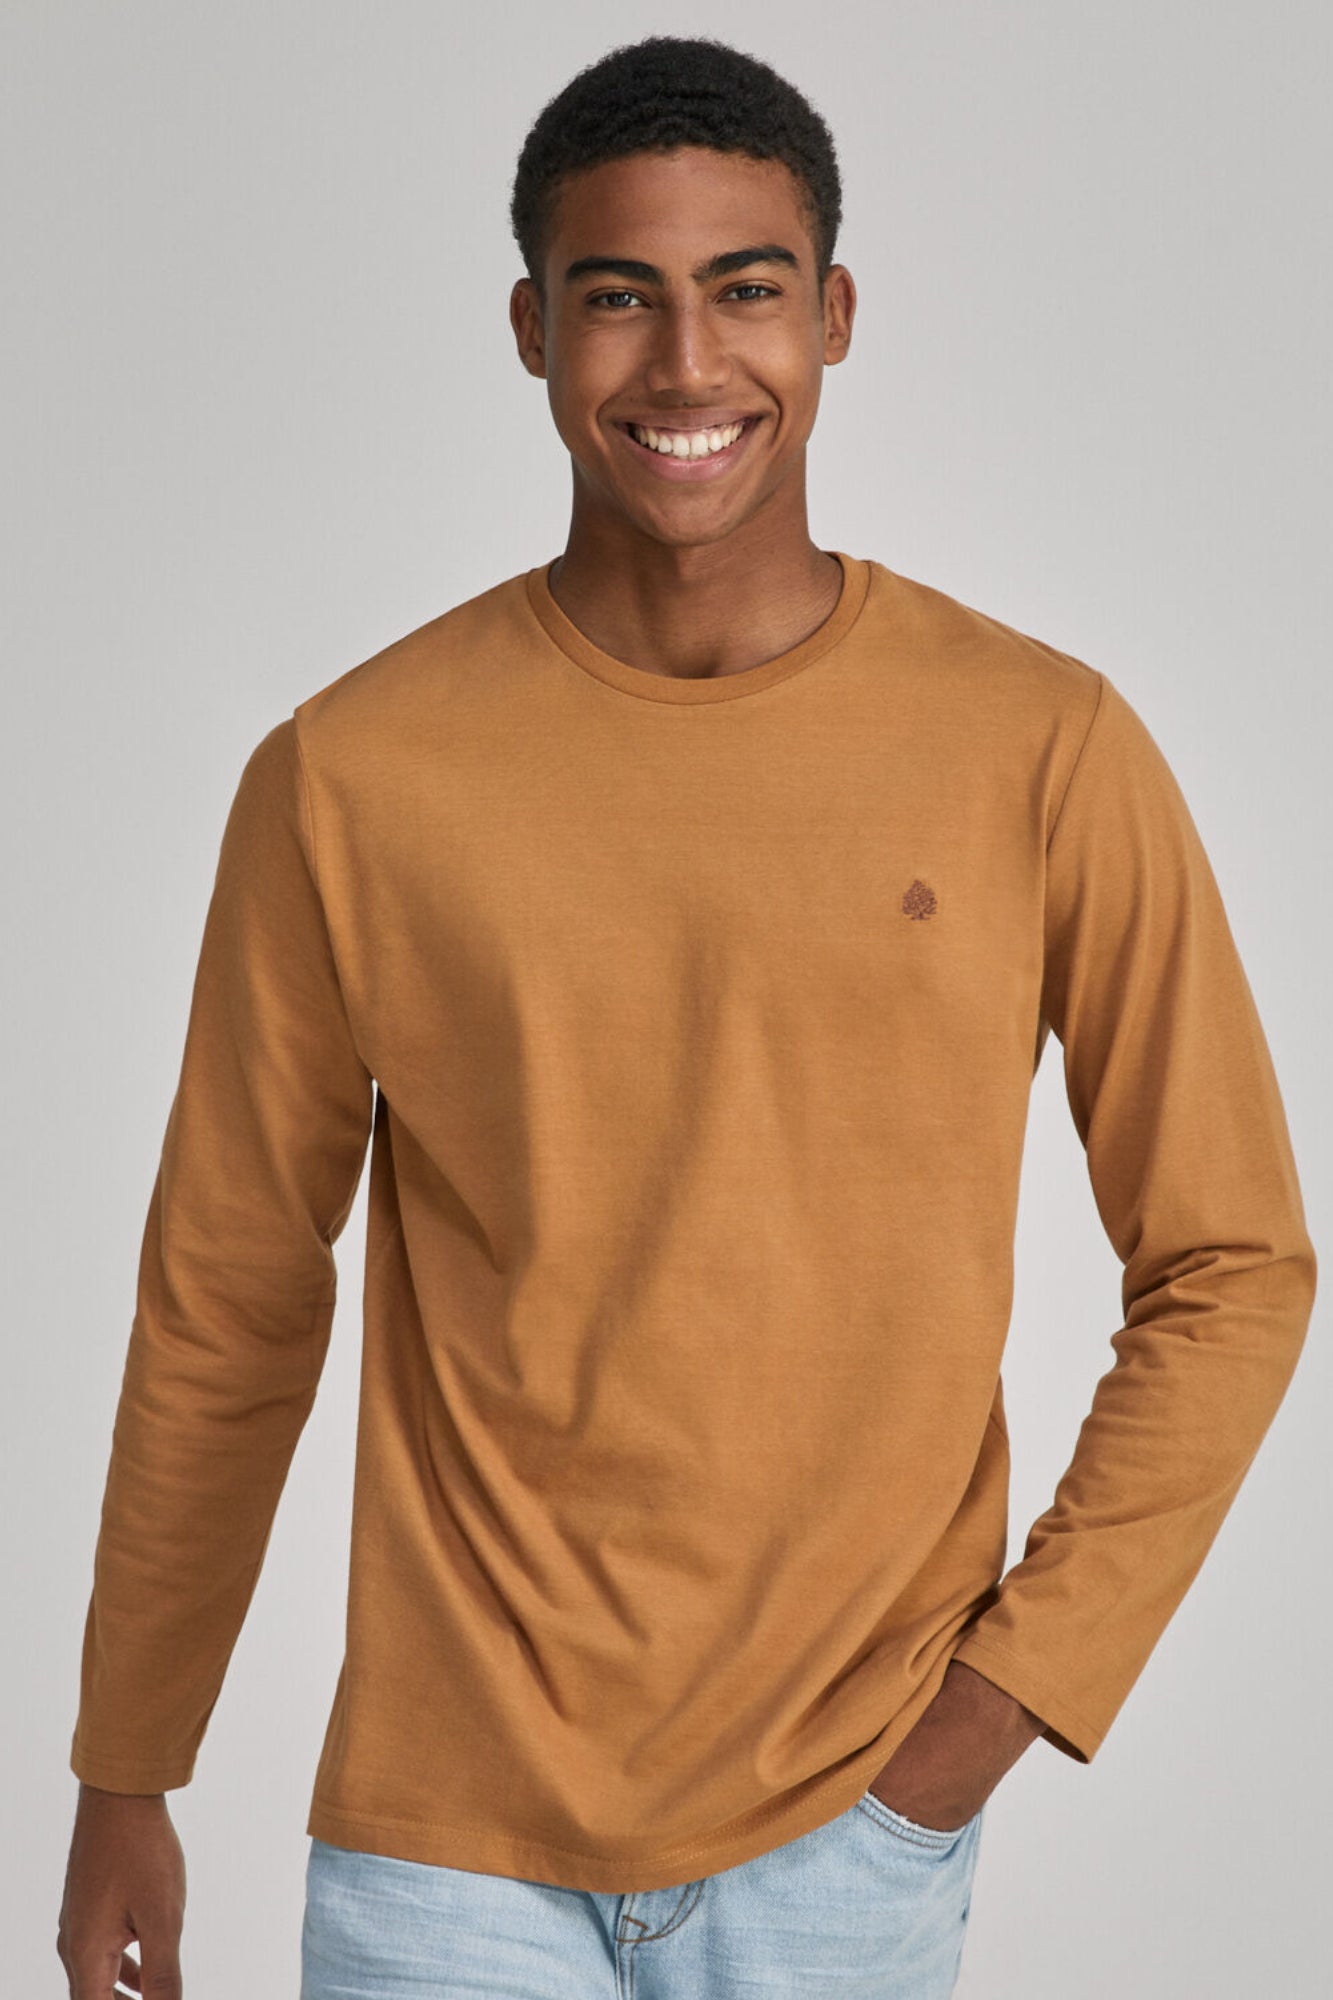 Essential long-sleeved T-shirt